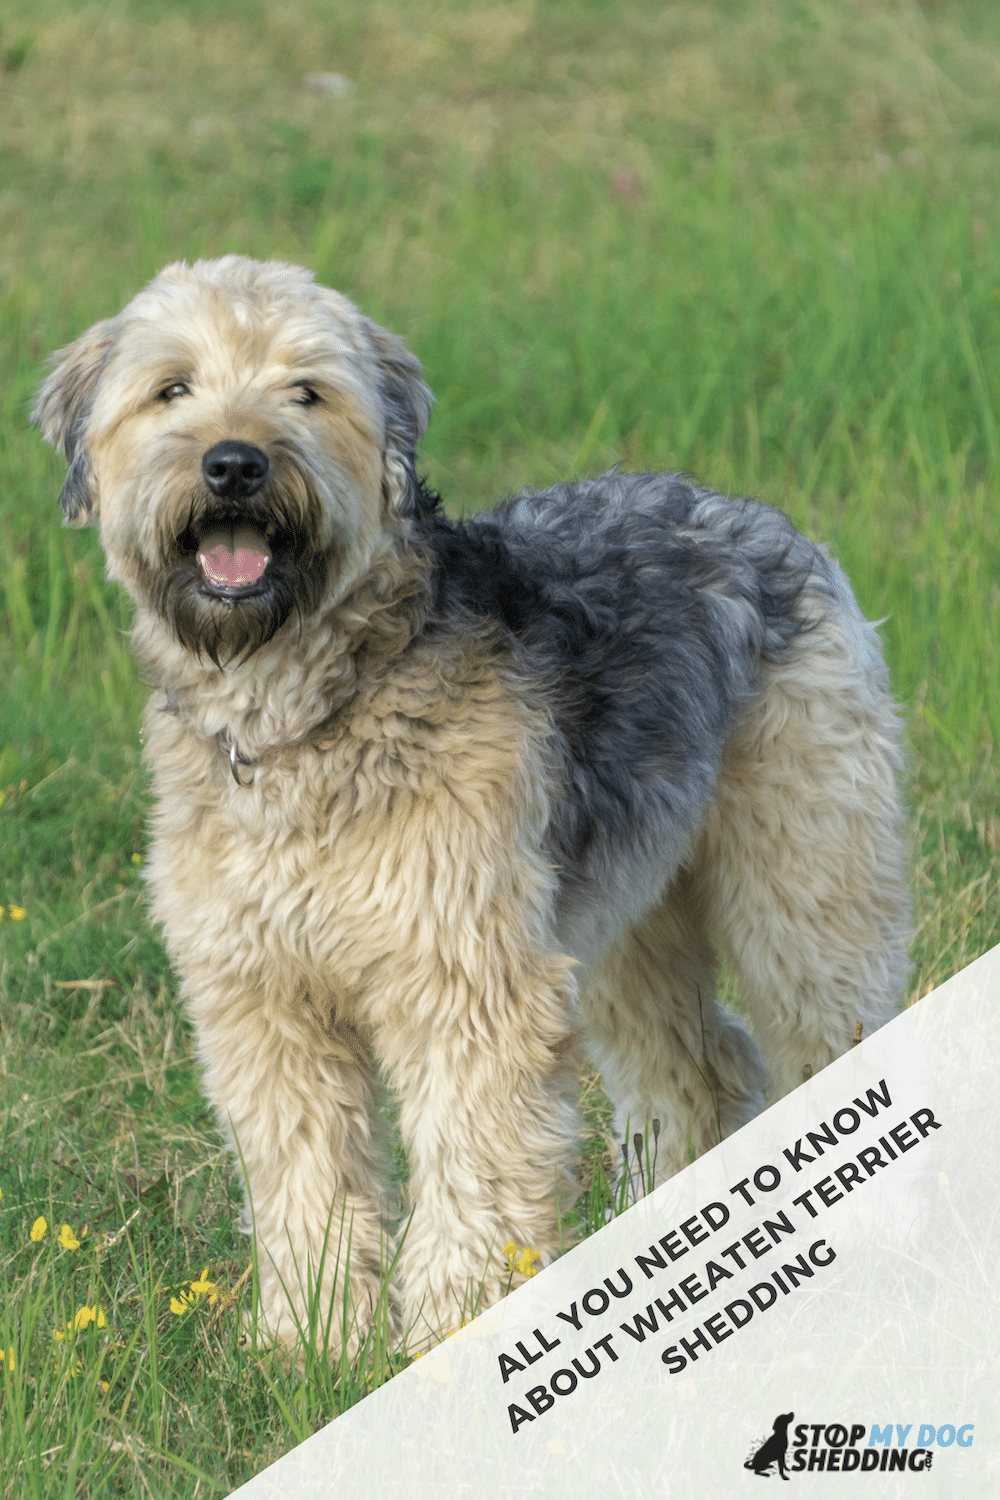 Do Soft Coated Wheaten Terriers Shed?